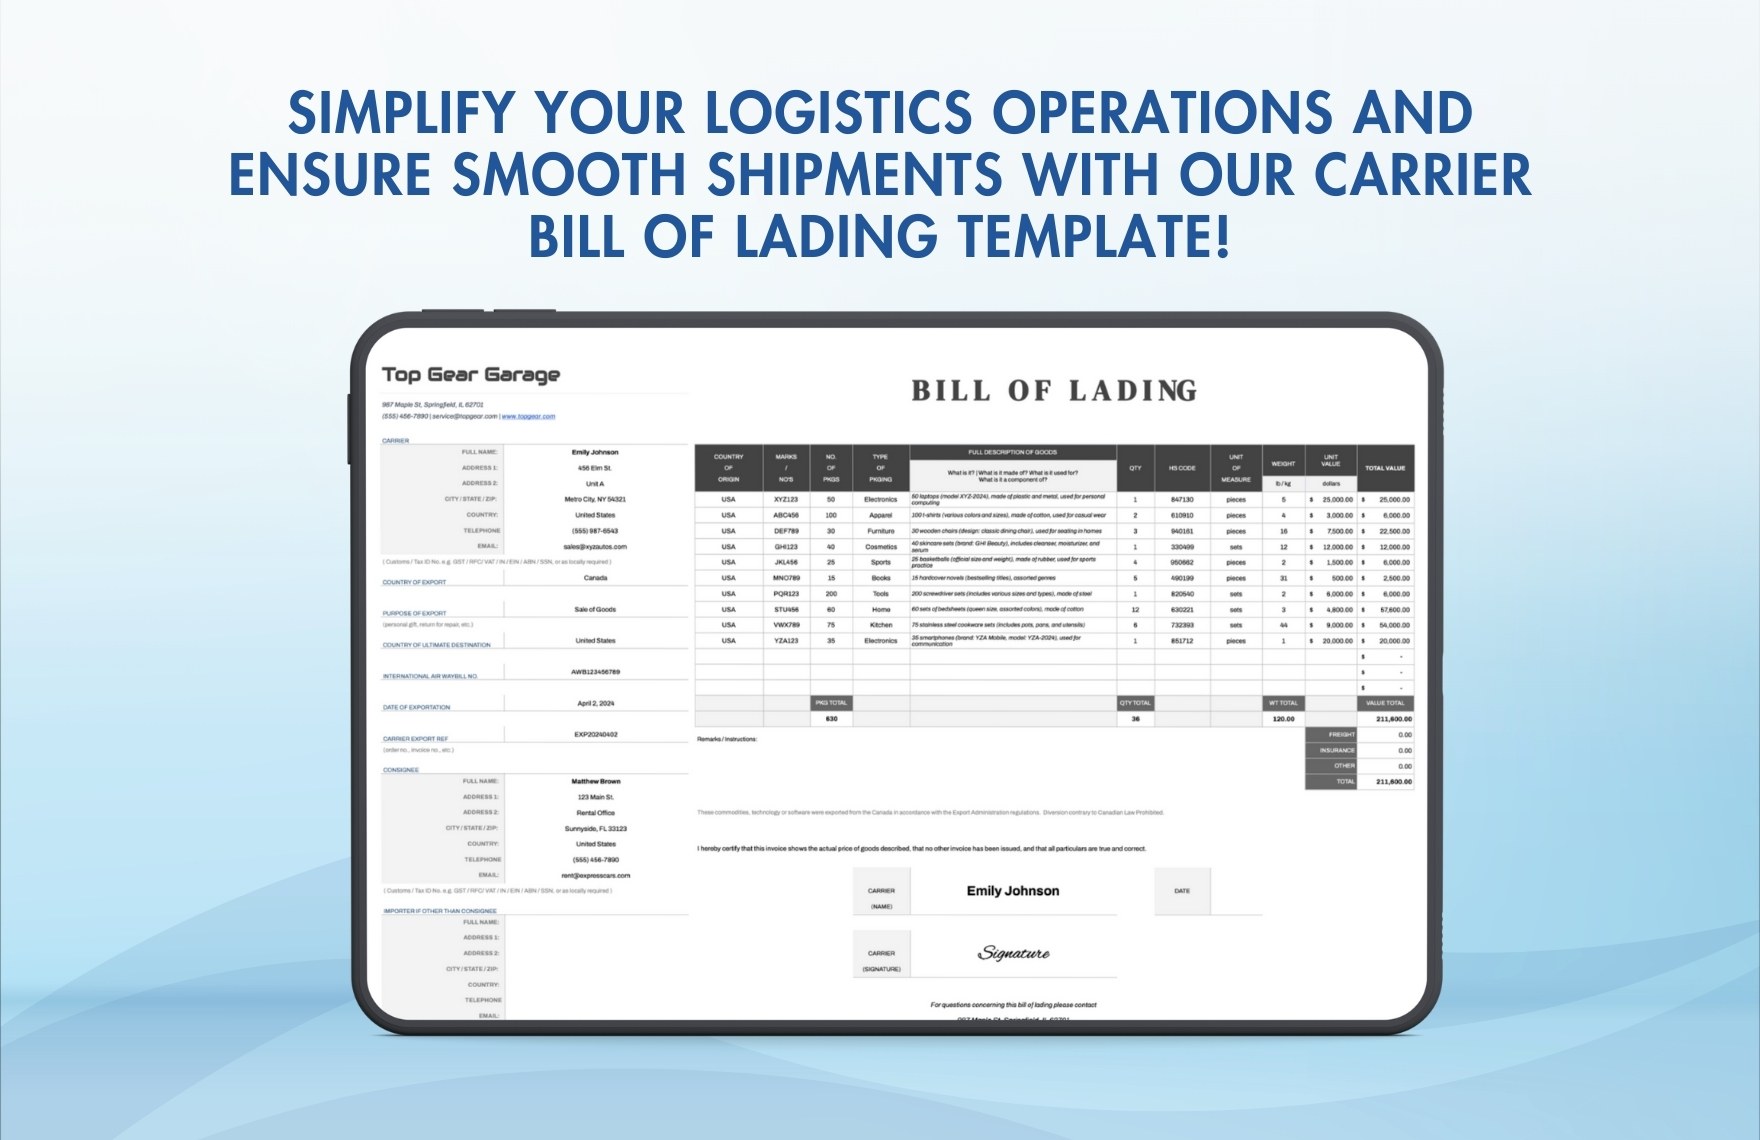 Carrier Bill of Lading Template